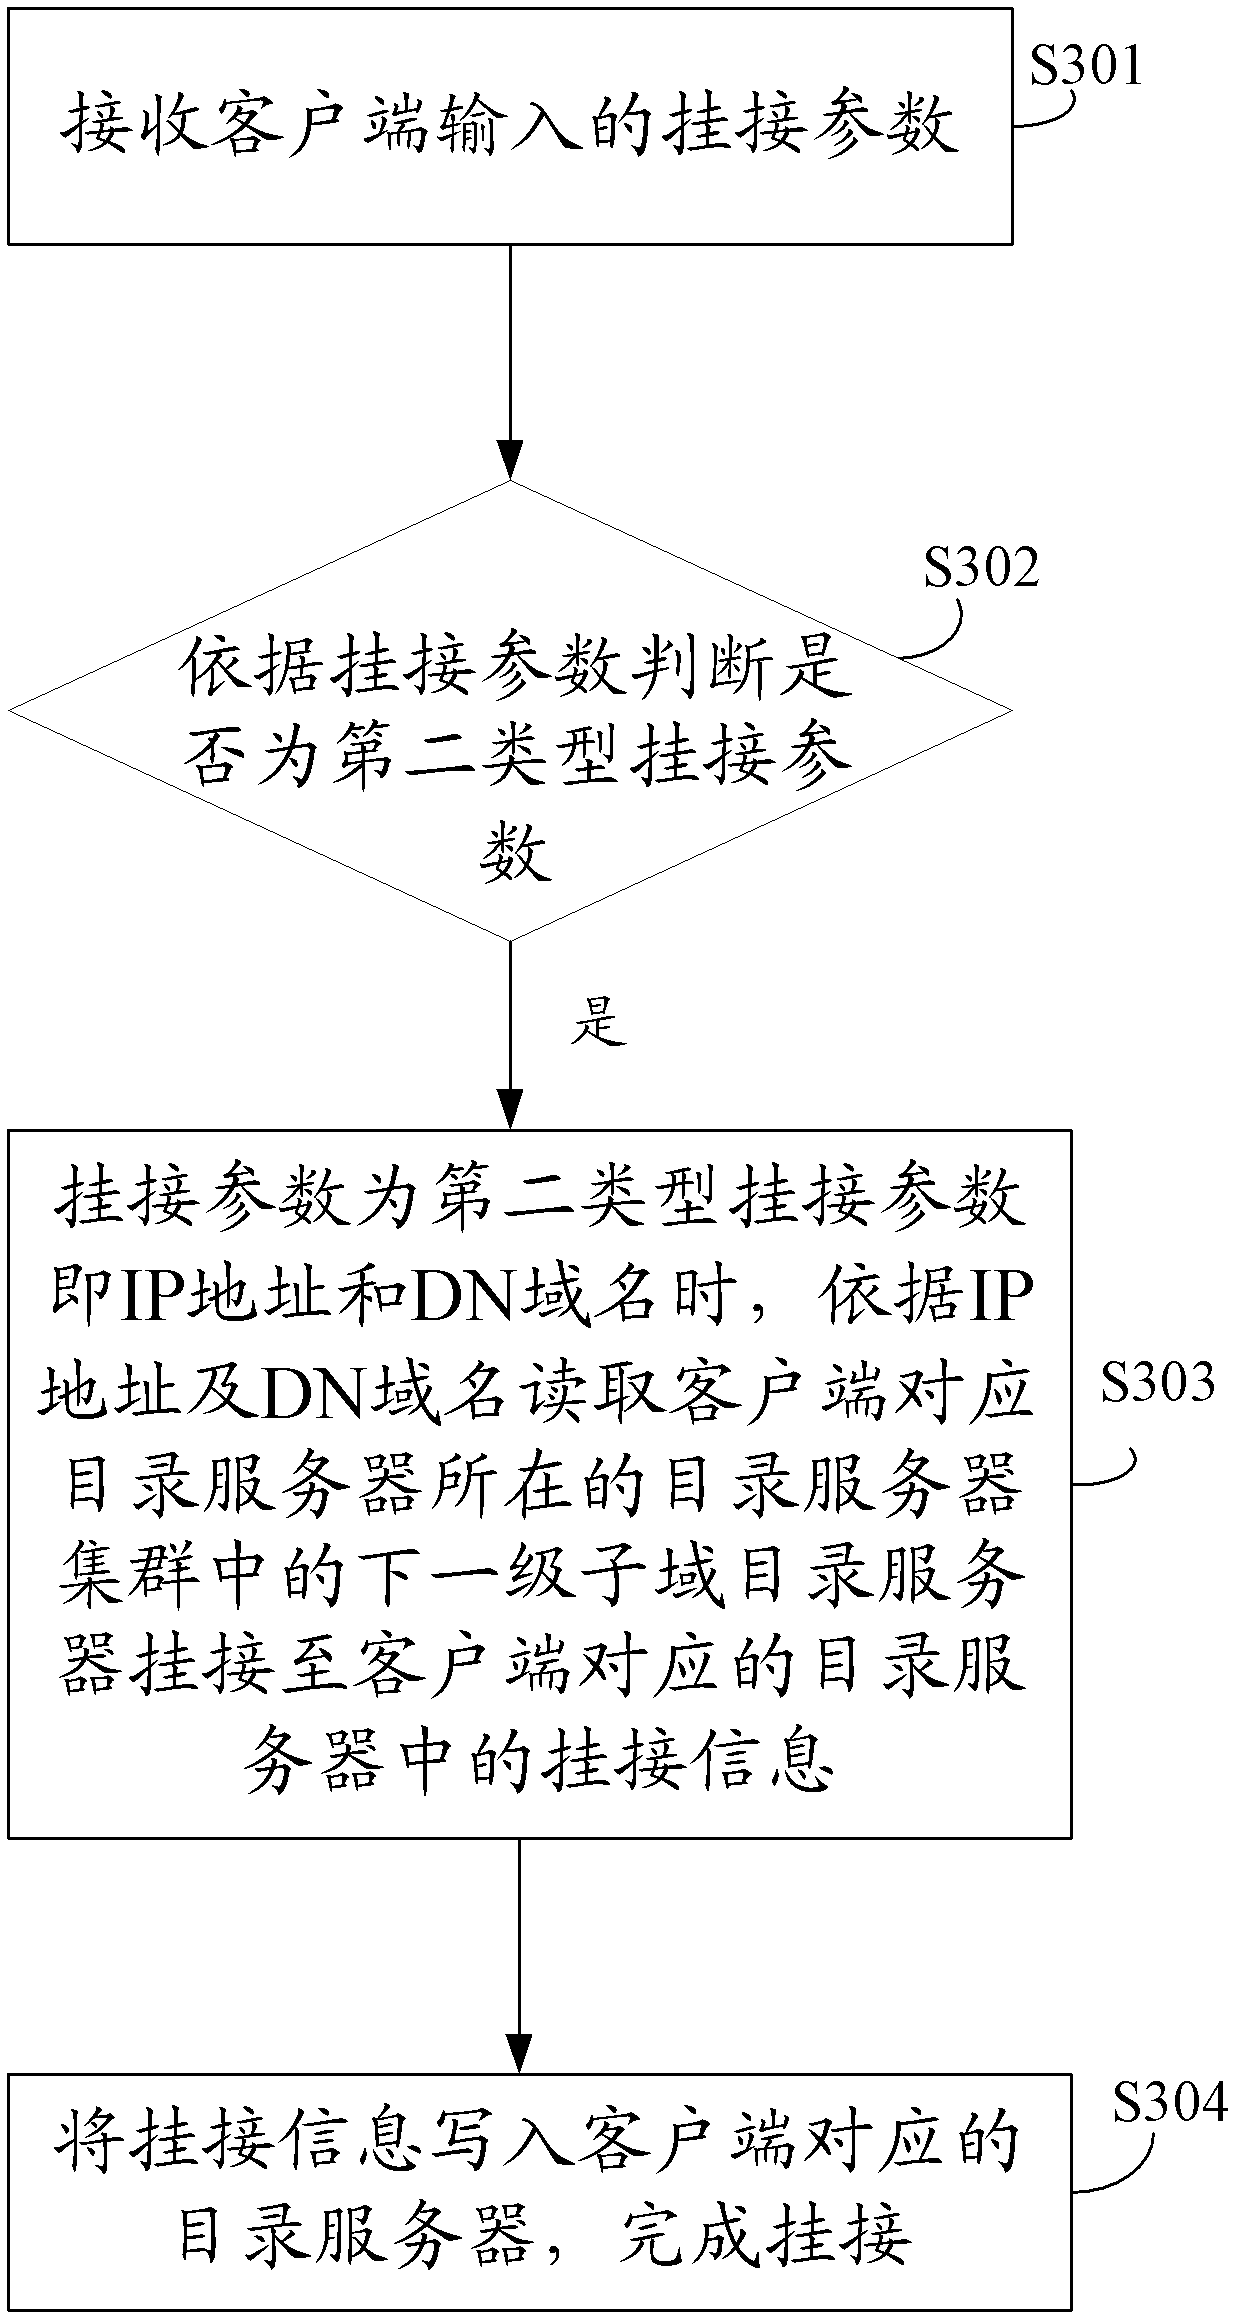 Method and system for articulation of directory service domains